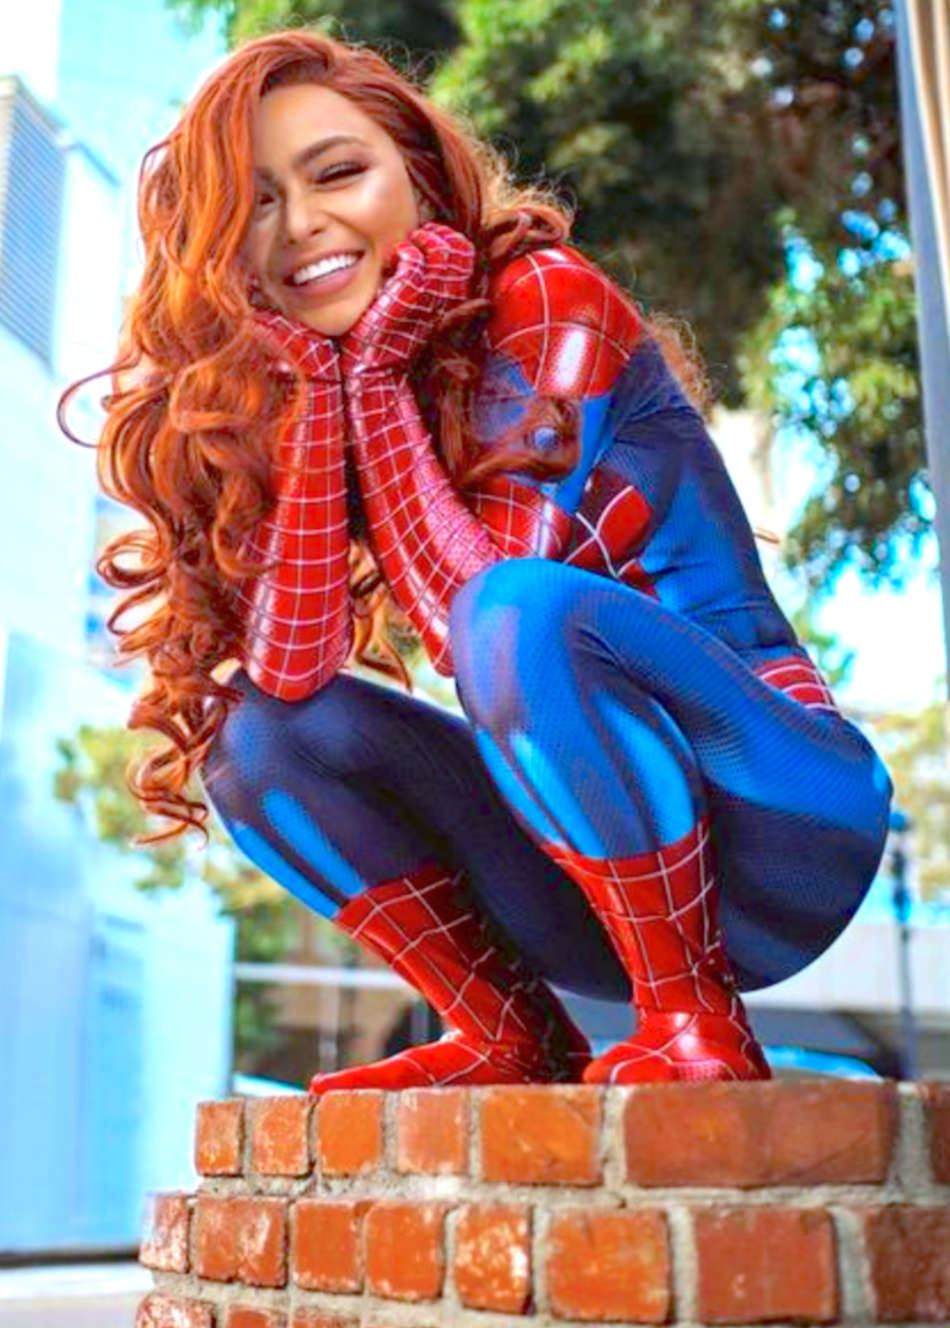 Sexy Red Hot Cosplay Girls Spiderman Women Best Photo Compilation 2021 (89 HQ Photos) 94